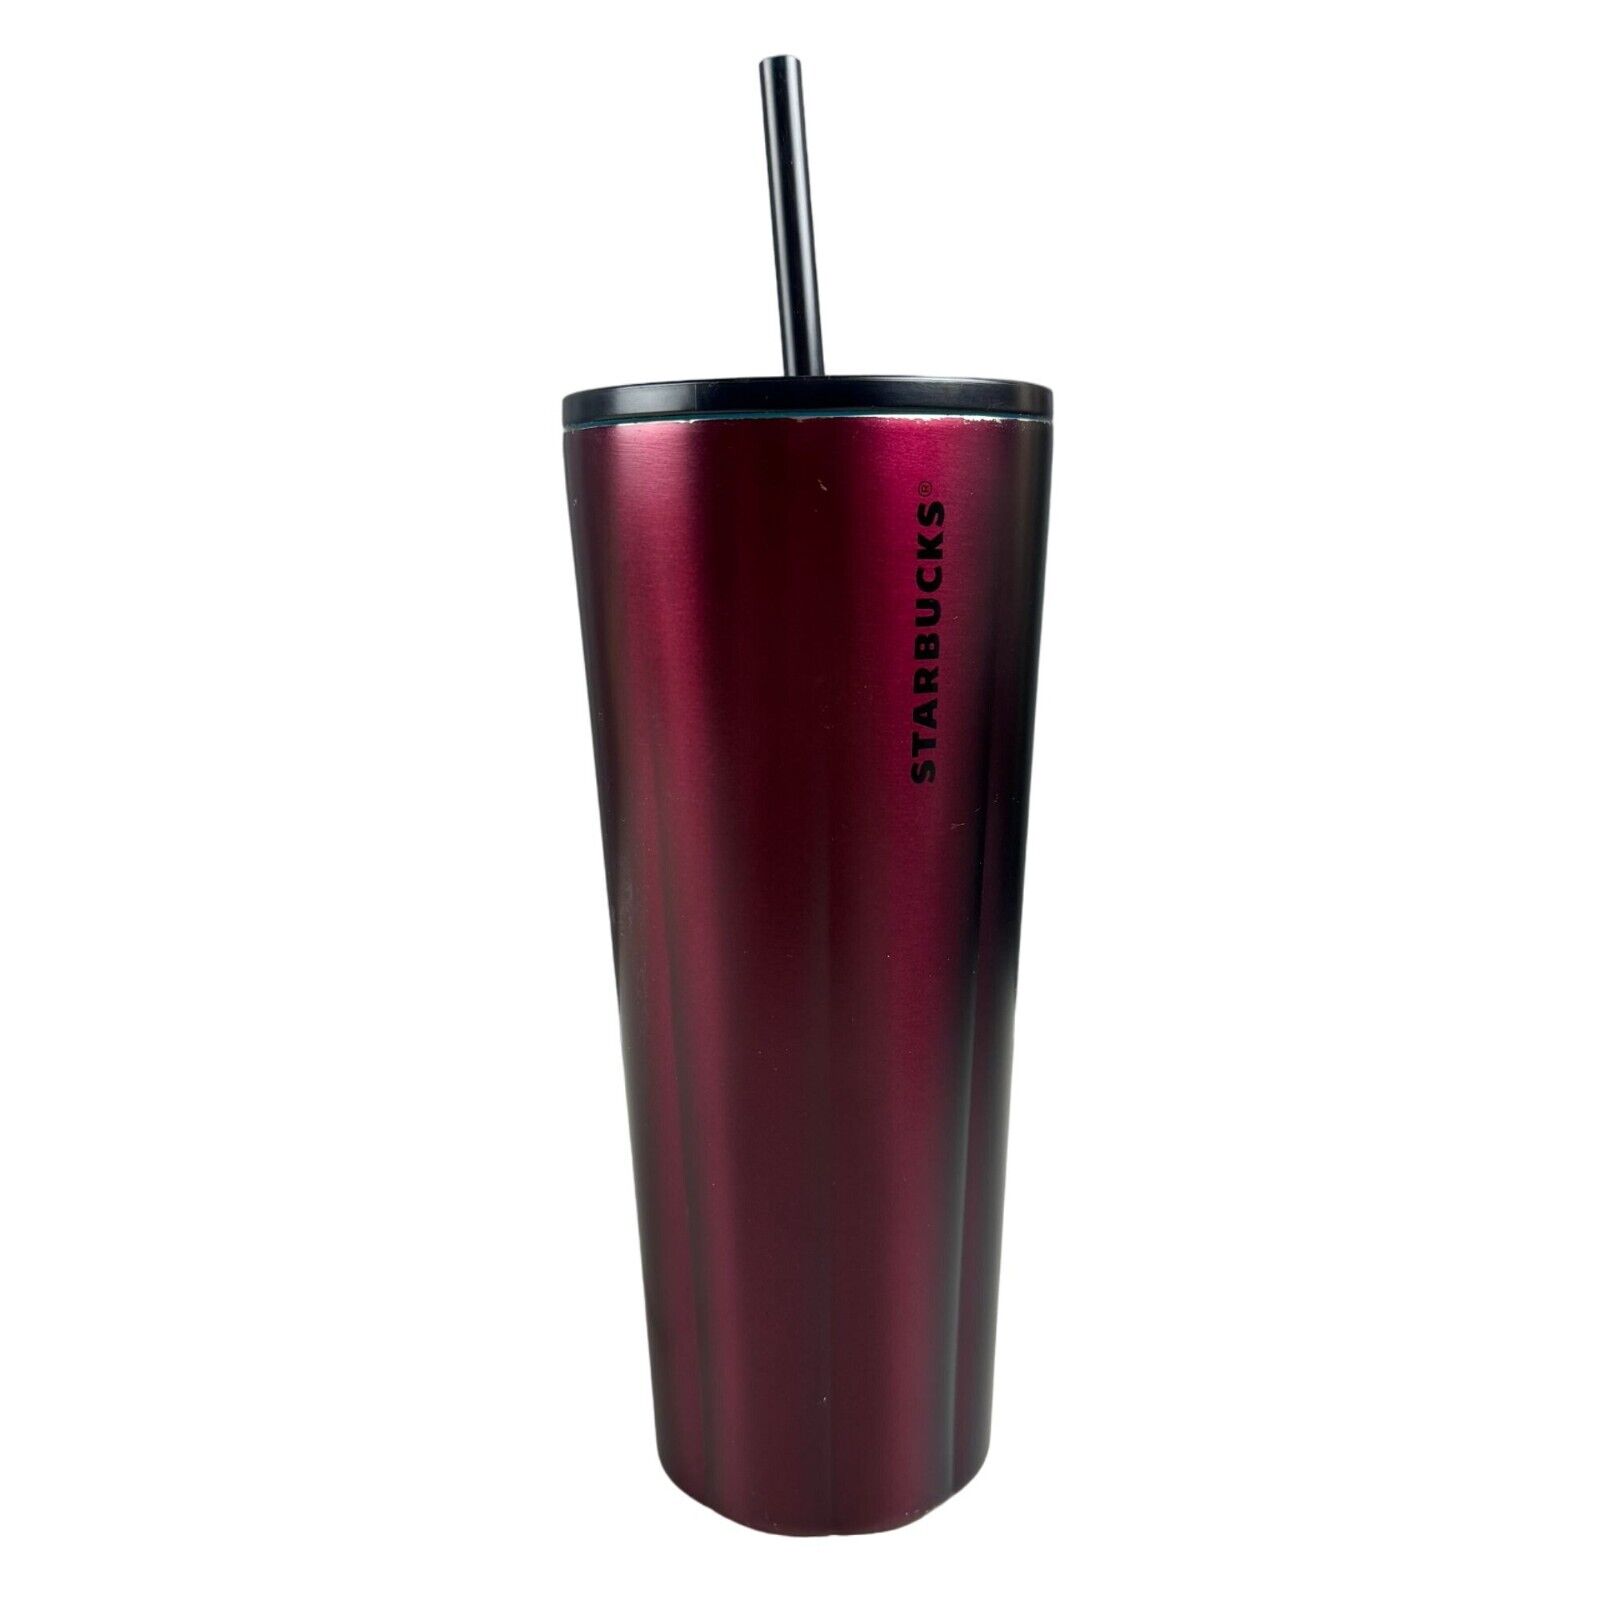 STARBUCKS Stainless Steel Oil Slick Blue and Maroon Ombre Cold Cup Tumbler 24 oz